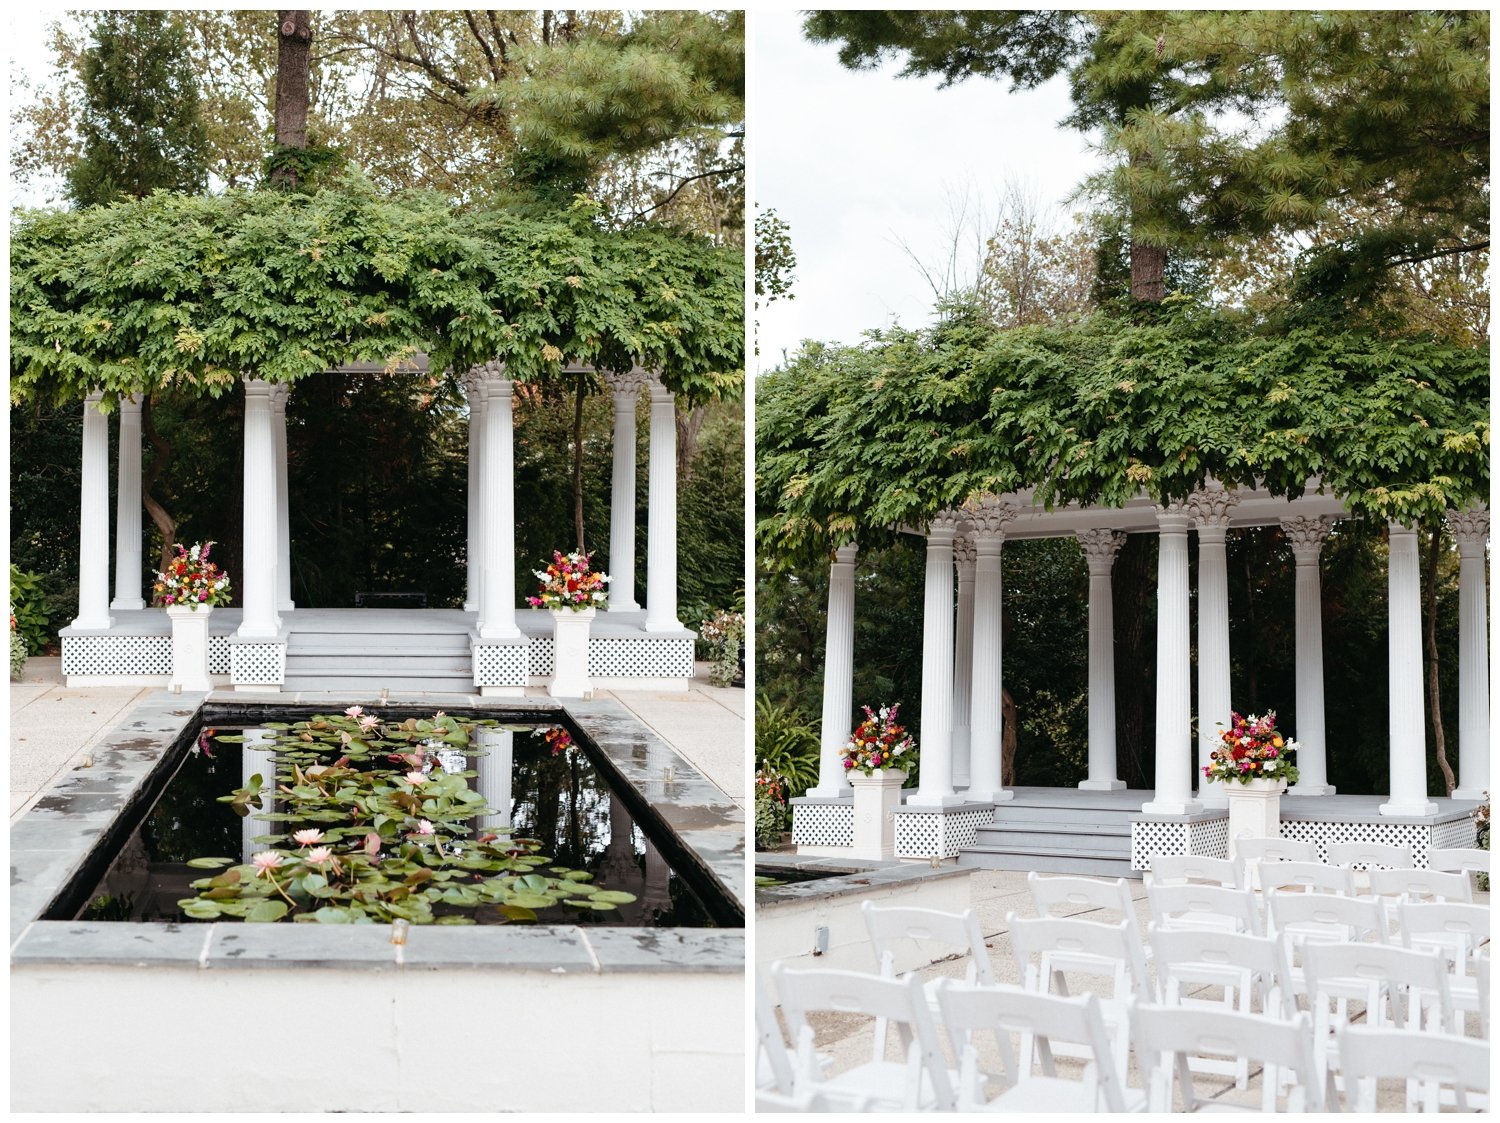 The terrace of Cereseville Mansion is set up for an intimate destination wedding ceremony